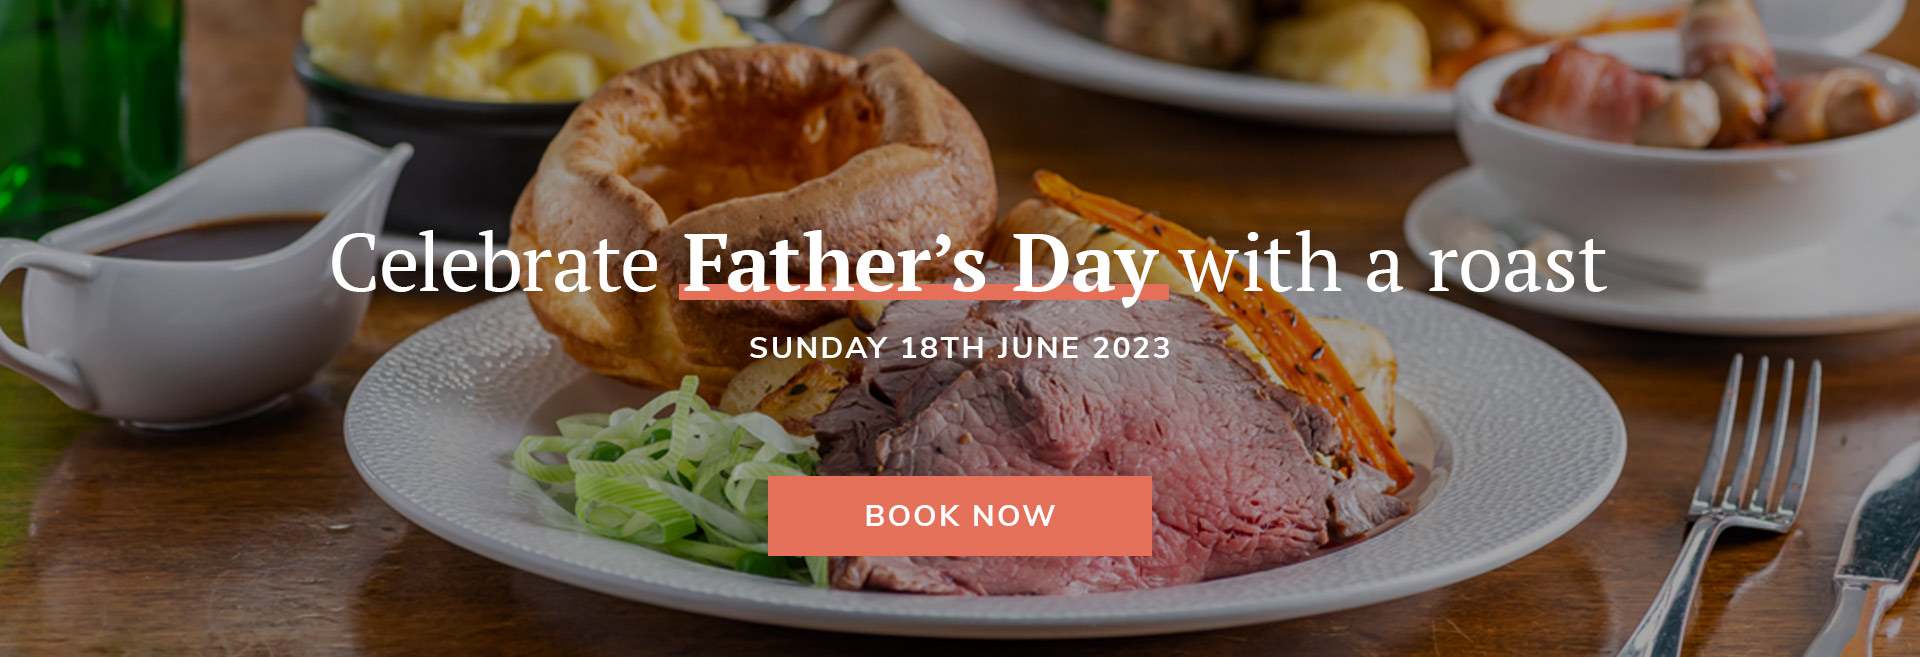 Father's Day at The Plough